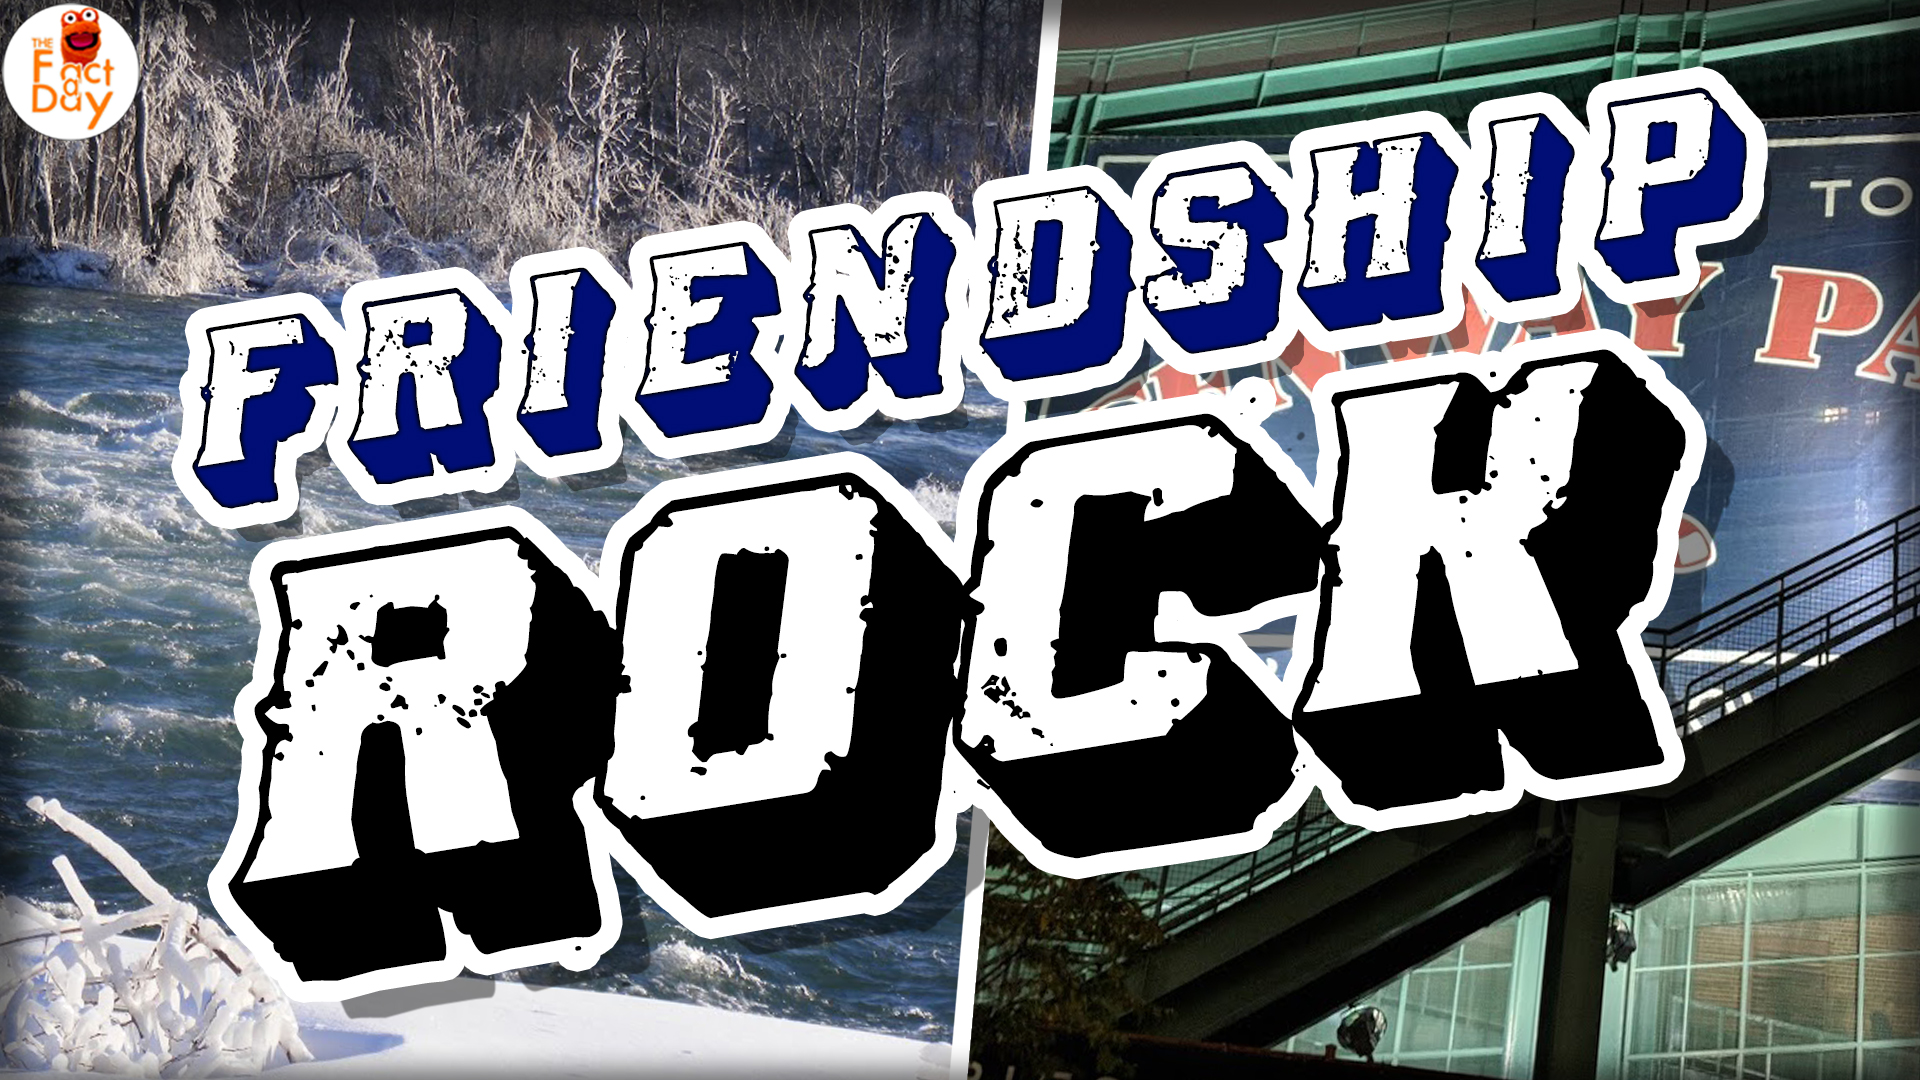 CamBomb – Friendship Rock ( The Fact a Day Album )